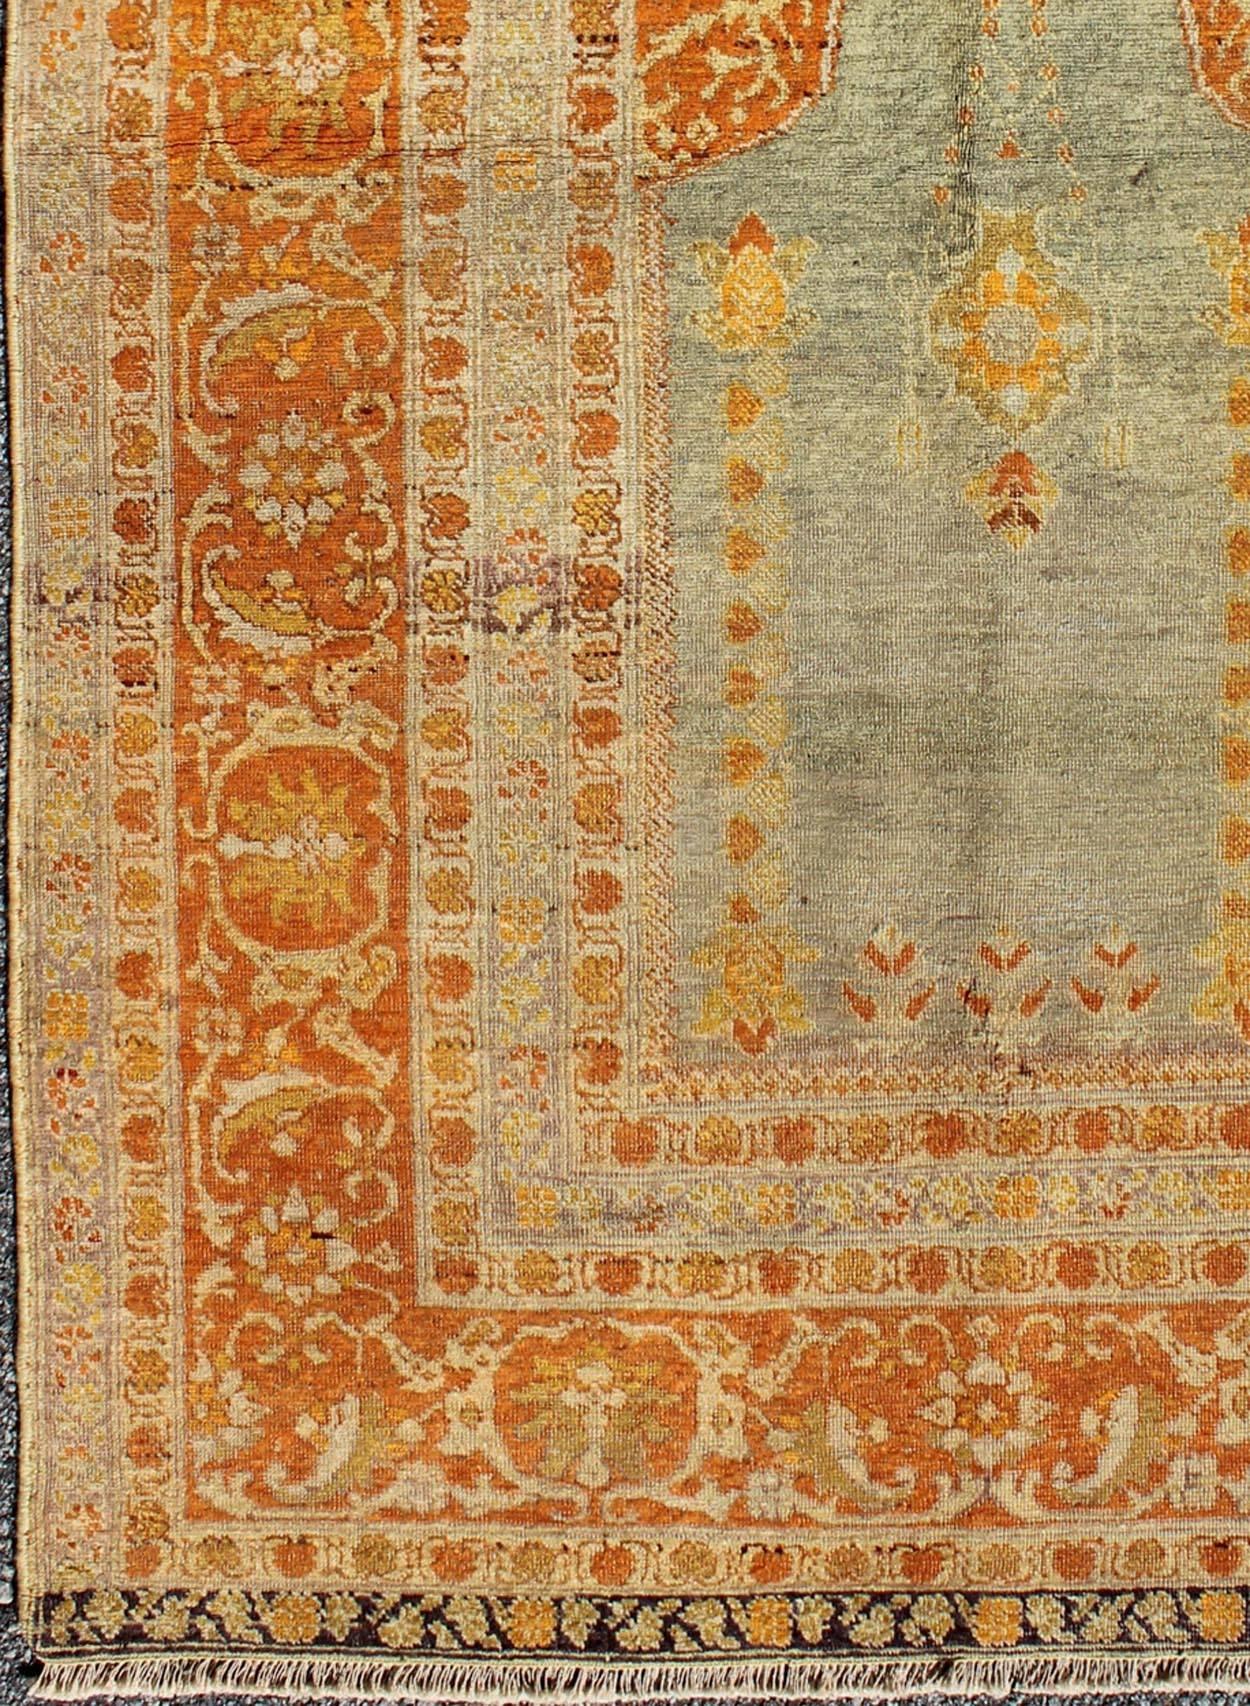 Turkish Sivas Antique with Prayer Design rug/ 13-0303  origin/turkey  

This lovely and finely woven rug displays a prayer design set on a light silver/blue background and framed by a copper/orange border. 
Measures: 4 x 6'2.